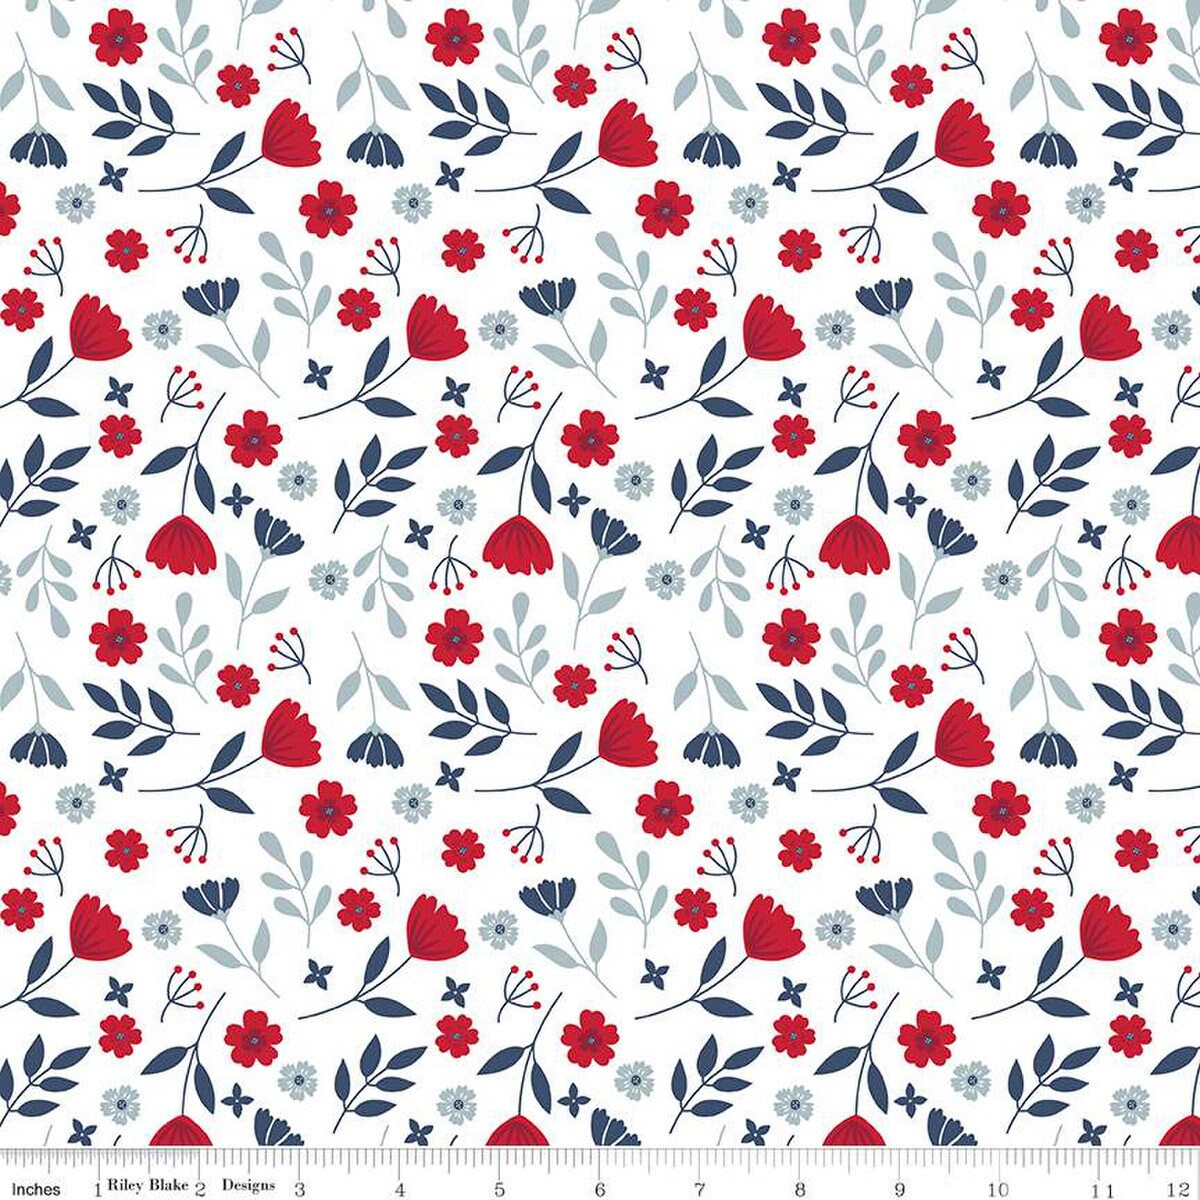 American Beauty Fabric Rolie Polie (Jelly Roll) - Riley Blake Designs RP-14440-40, Patriotic Floral Fabric Jelly Roll Strip Pack